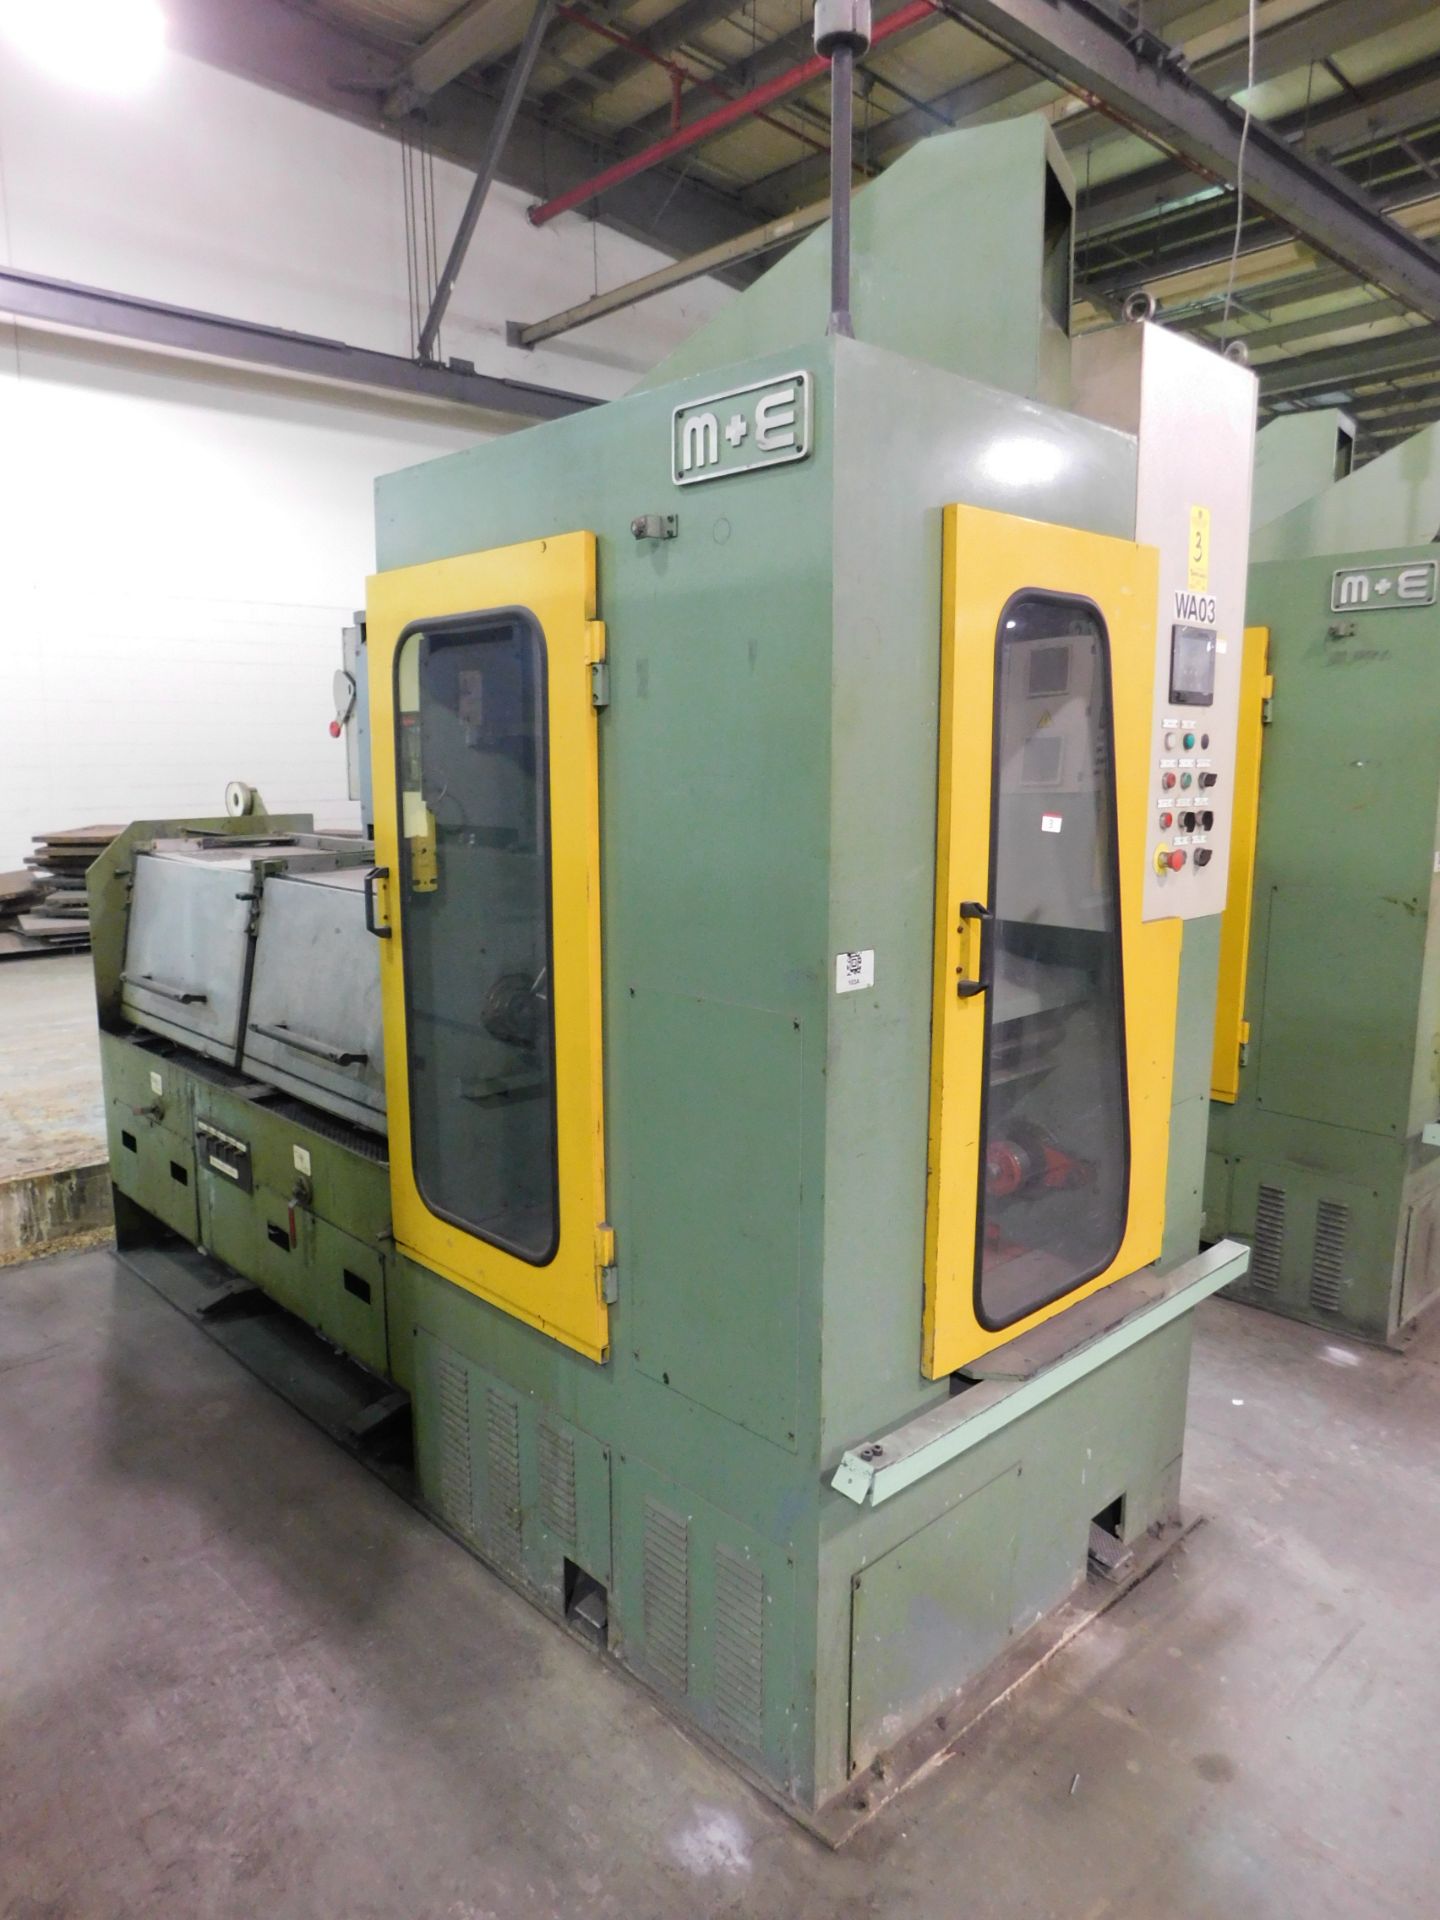 M & E Model NMG 25 Wet Wire Drawing Machine, SN 4252-13-09 with Integrated Spooler Model, SP 330,